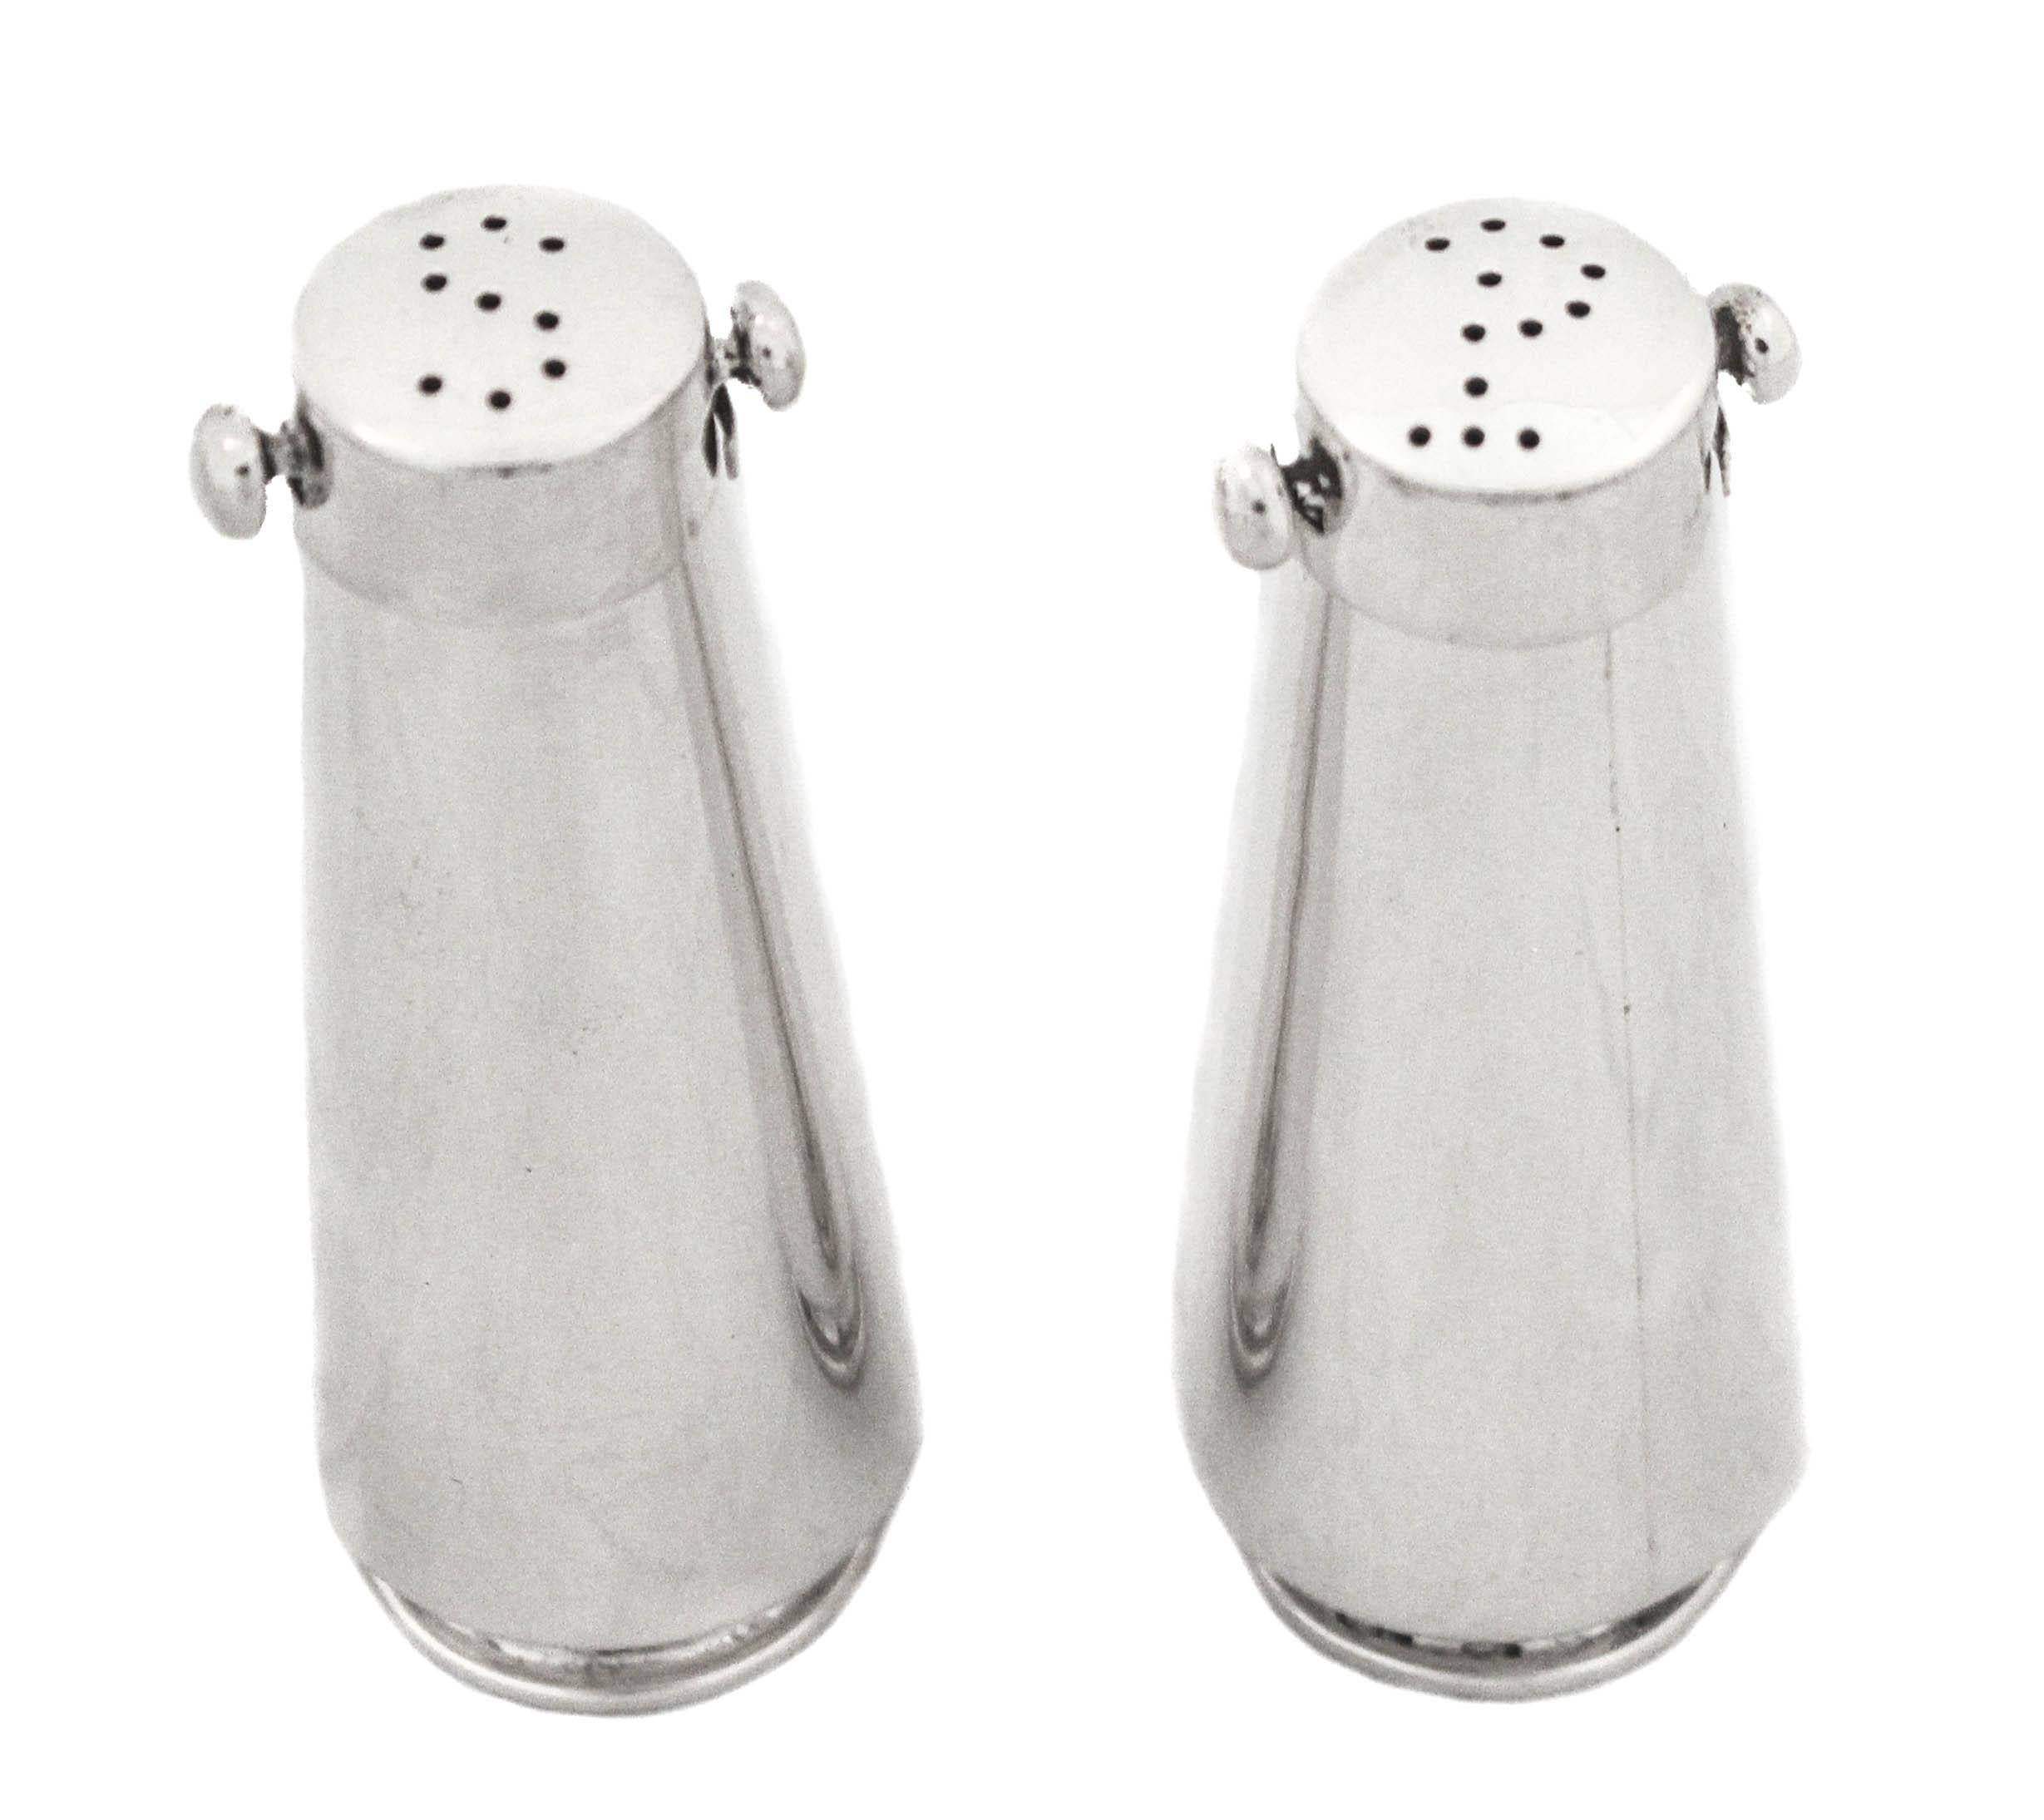 We are happy to offer you this pair of sterling silver Japanese salt shakers from the 1960s. The are uber-modern and sleek. A very unusual pair that are quintessential Mid-Century Modern. Japan is known for there edgy and sleek designs and this is